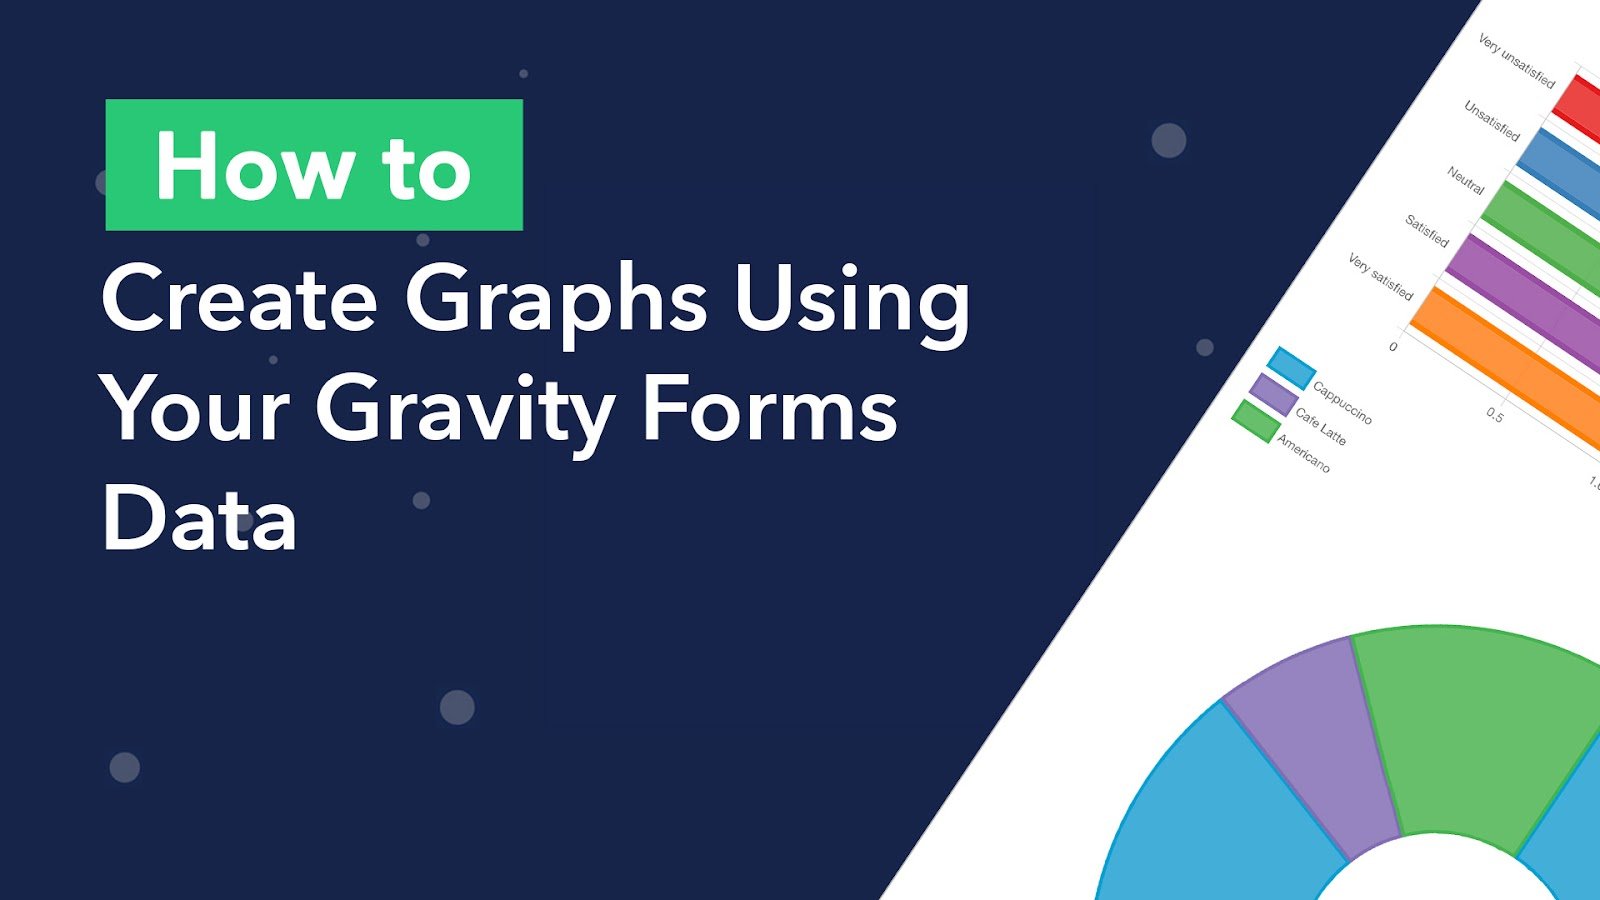 How to create graphs using your Gravity Forms data